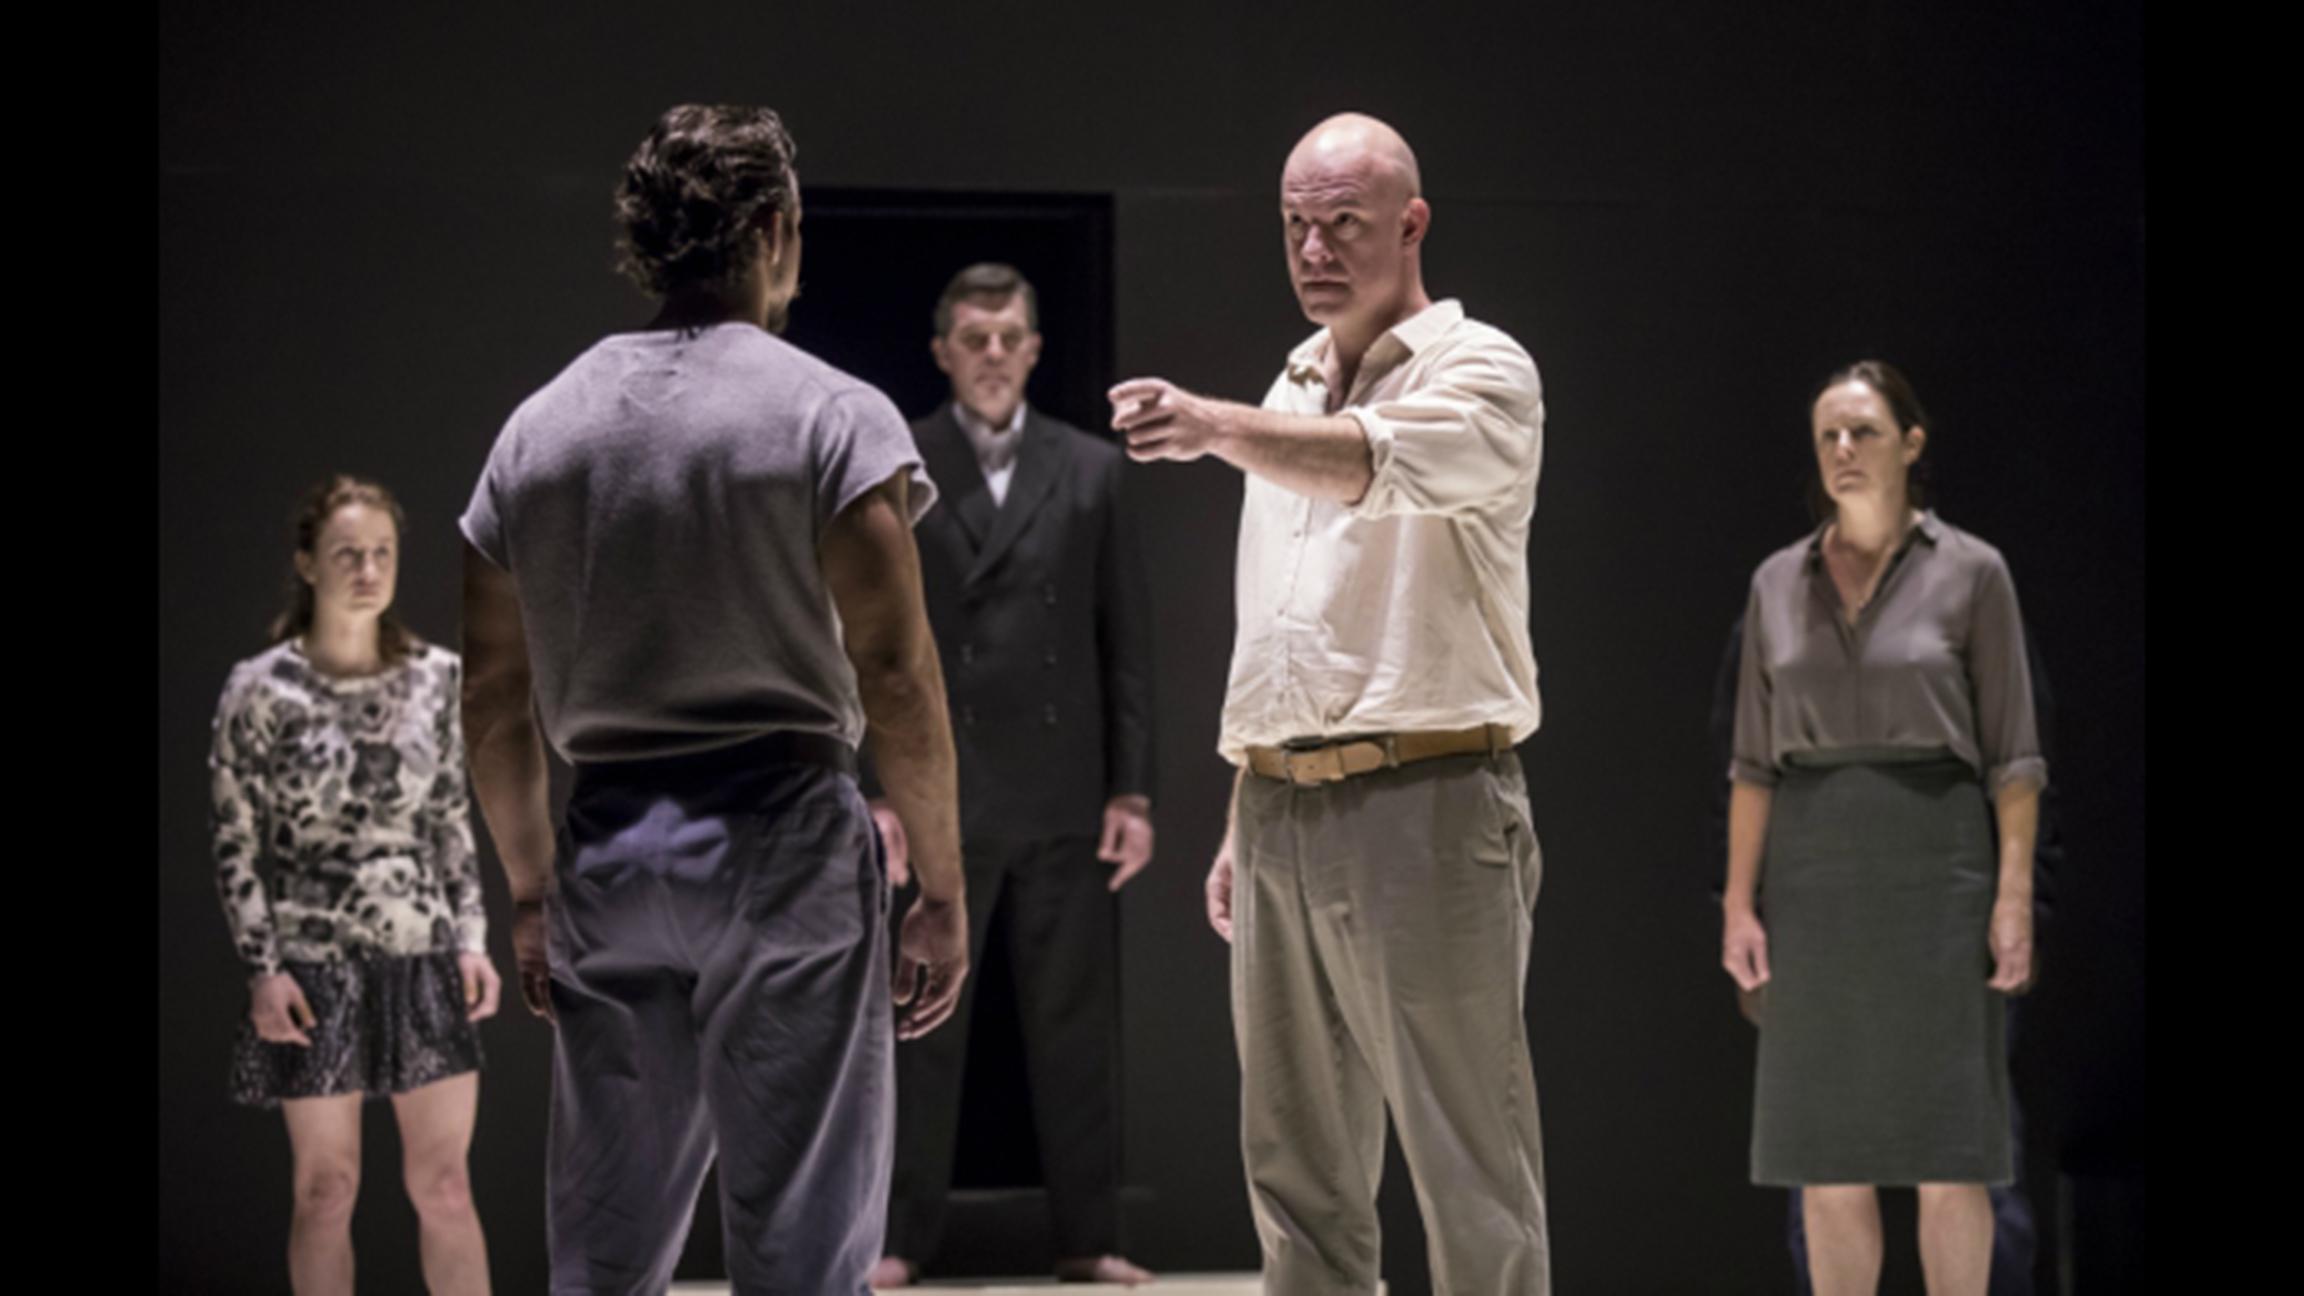 Ian Bedford (Eddie), Catherine Combs (Catherine), Brandon Espinoza (Marco), James D. Farruggio (Officer), and Andrus Nichols (Beatrice) in “A View From the Bridge” by Arthur Miller, directed by Ivo van Hove.